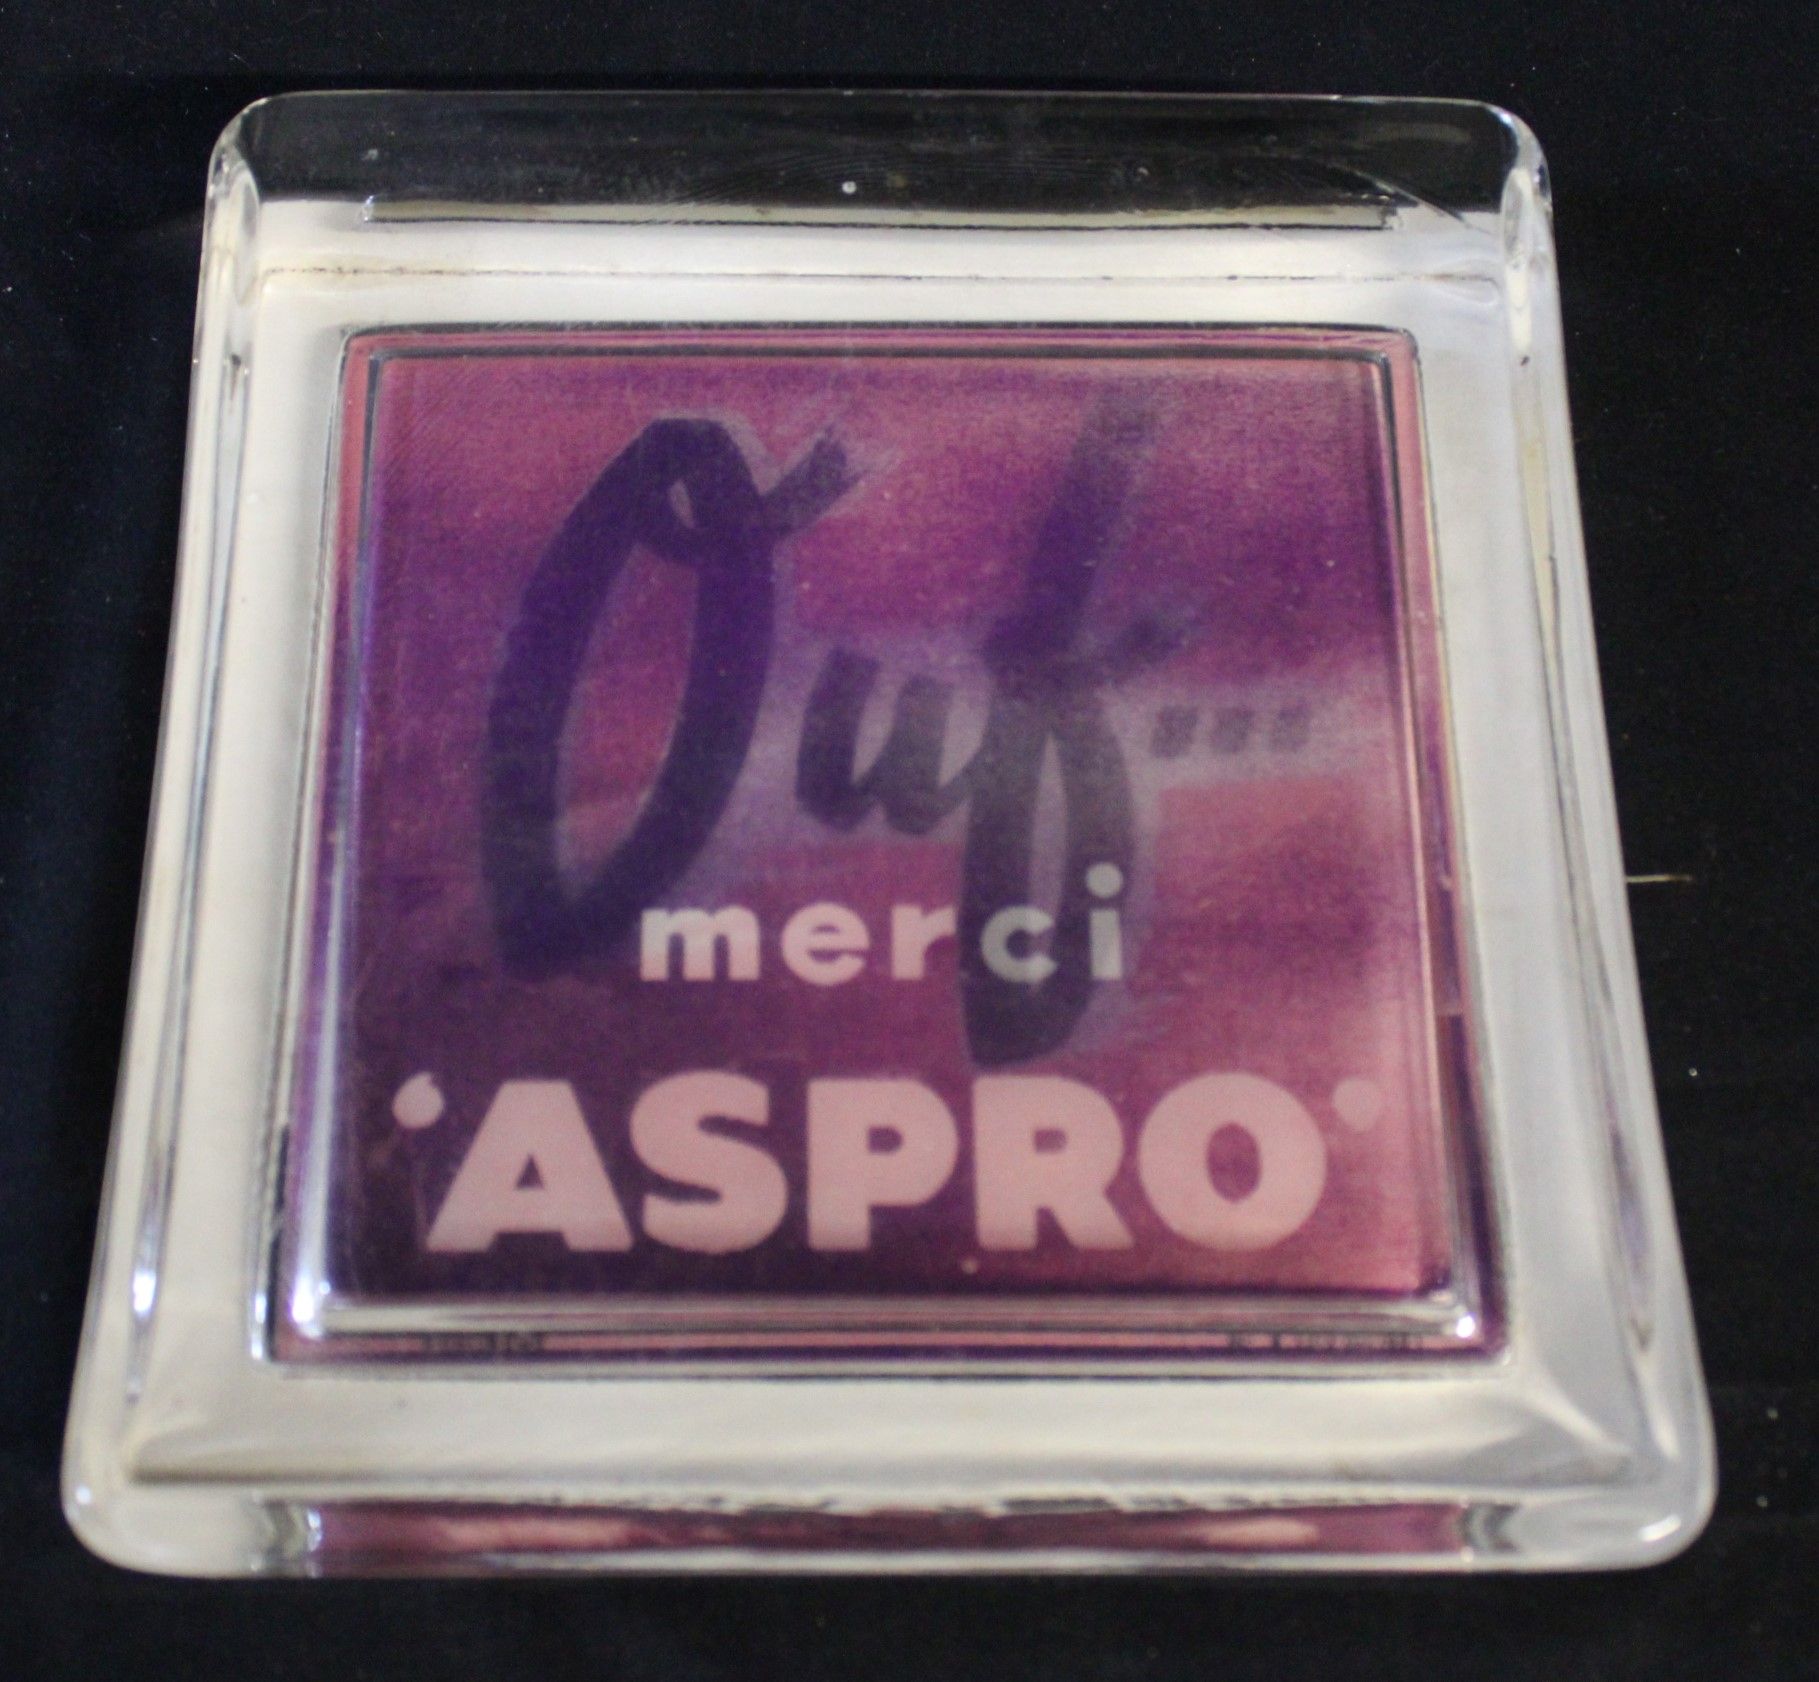 Null 
Square-shaped pocket organizer "OUF MERCI ASPRO", in glass, 17cm